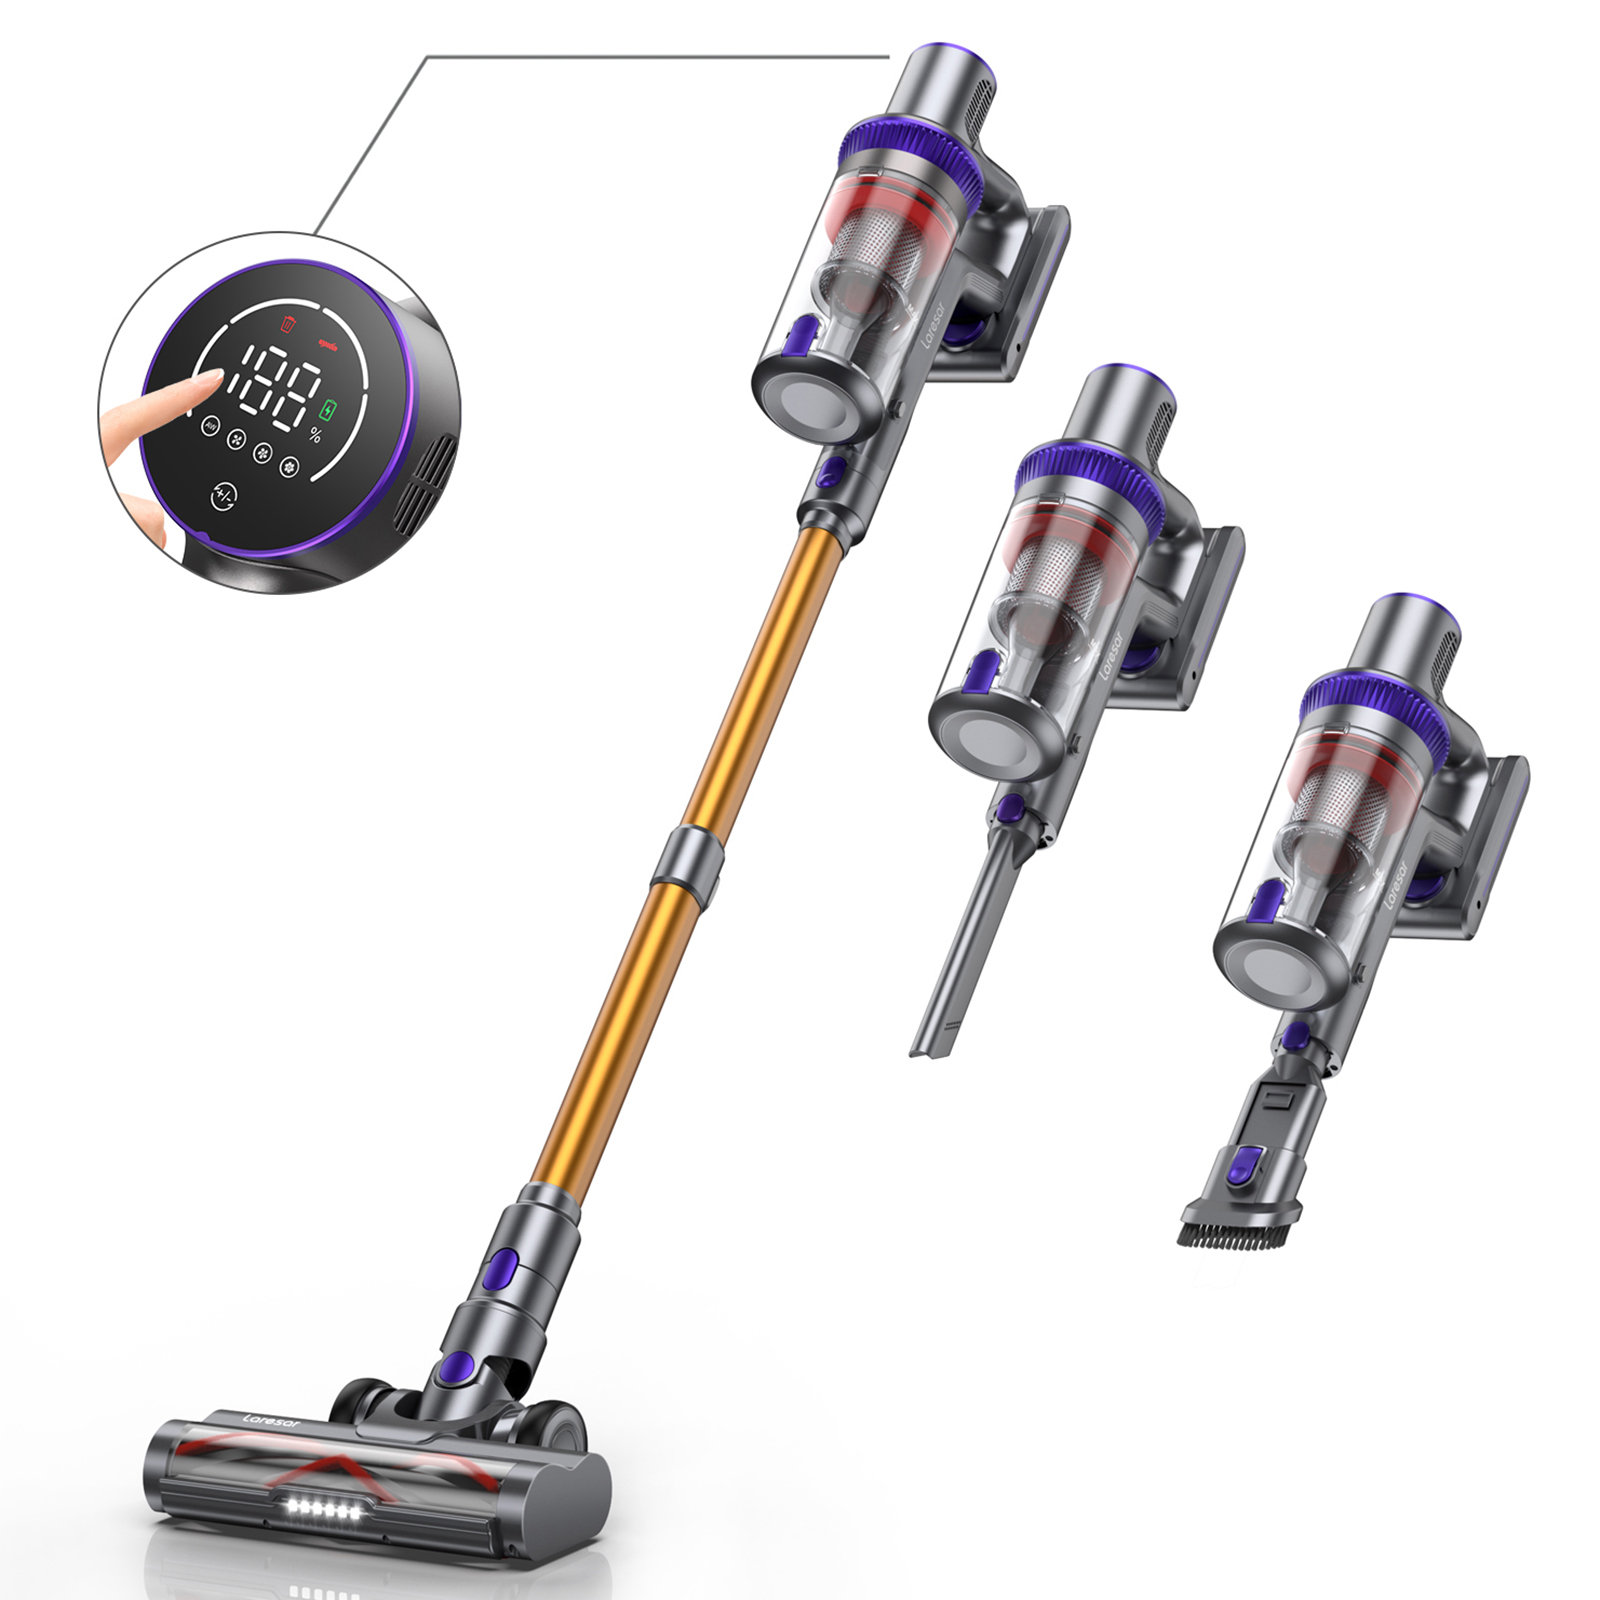 Honiture gifted me this 450W, 33000PA s14 cordless vacuum to try out.